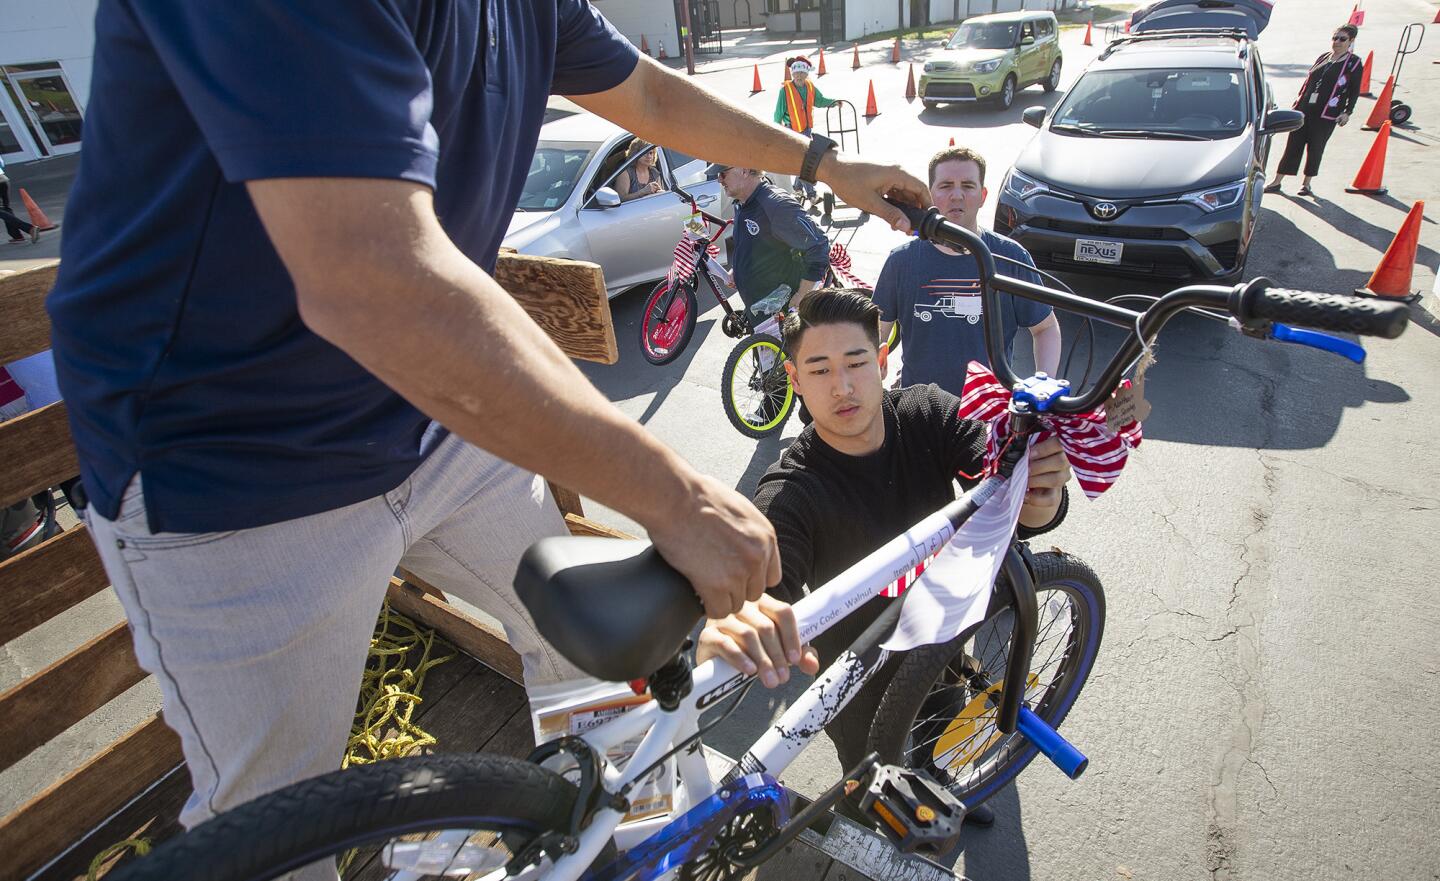 Proponent's Bobby Echeveirra hands off a bike to his colleague Christian Son at the collection center for the Share Our Selves (SOS) annual Adopt A Family Program at the OC Fair & Event Center on Tuesday. The program, which connects struggling Orange County families with community members who provide gifts and food for the holidays, is in its 49th year.